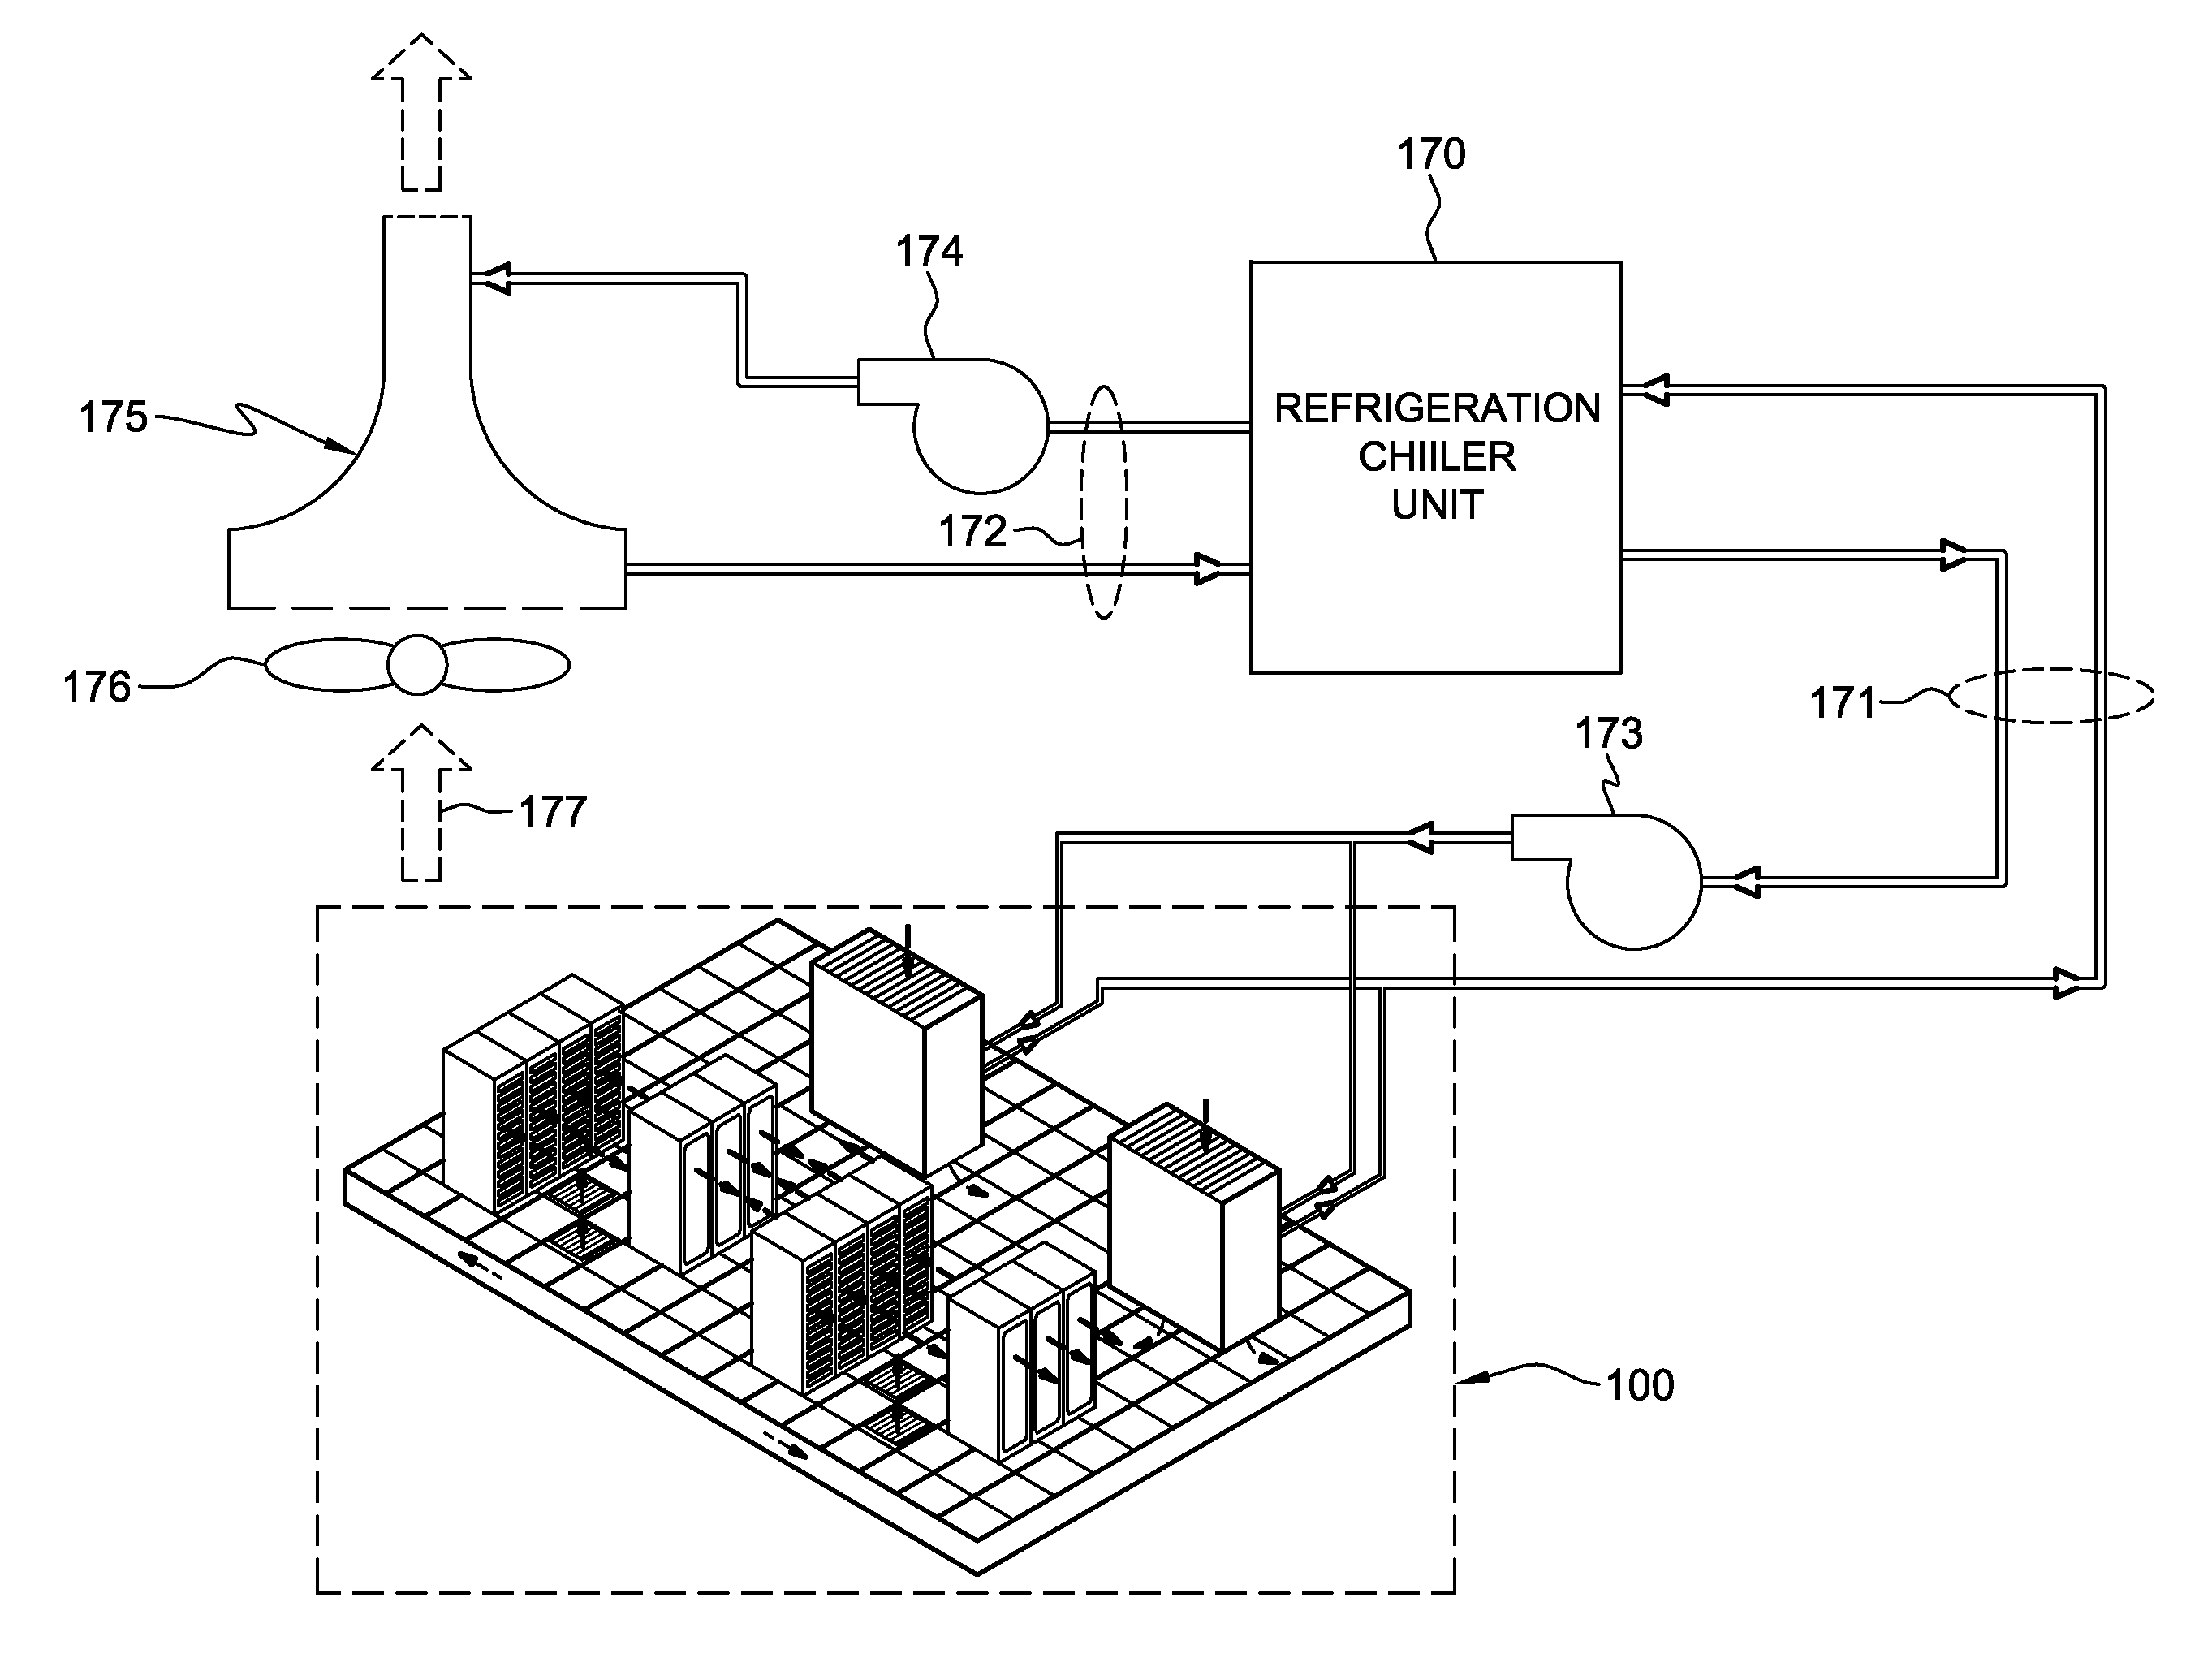 Dry-cooling unit with gravity-assisted coolant flow